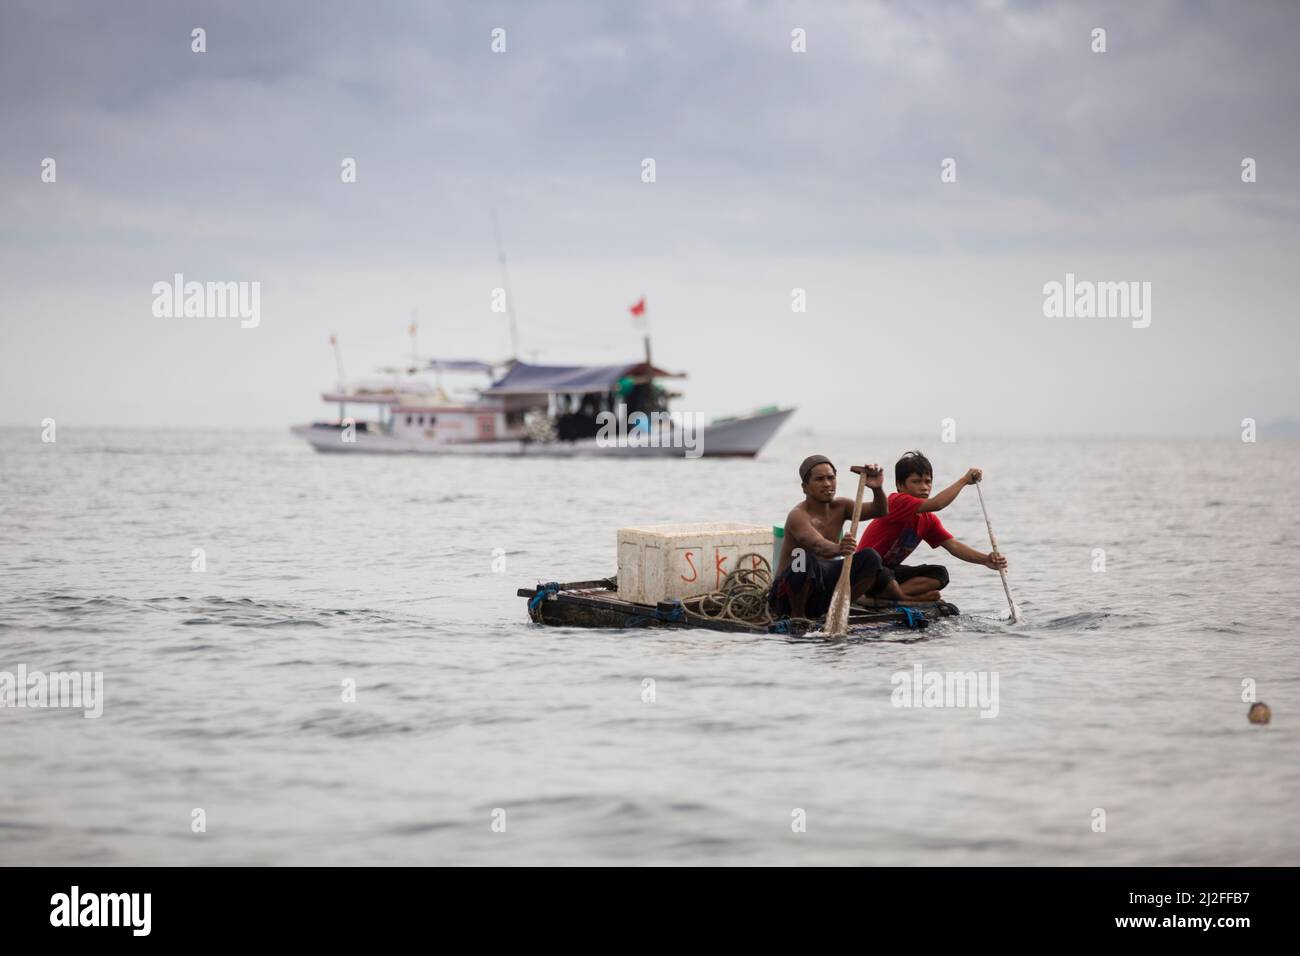 Two fishermen paddle a small raft out to sea from the city of Mamuju, West Sulawesi, Indonesia, Asia. Stock Photo